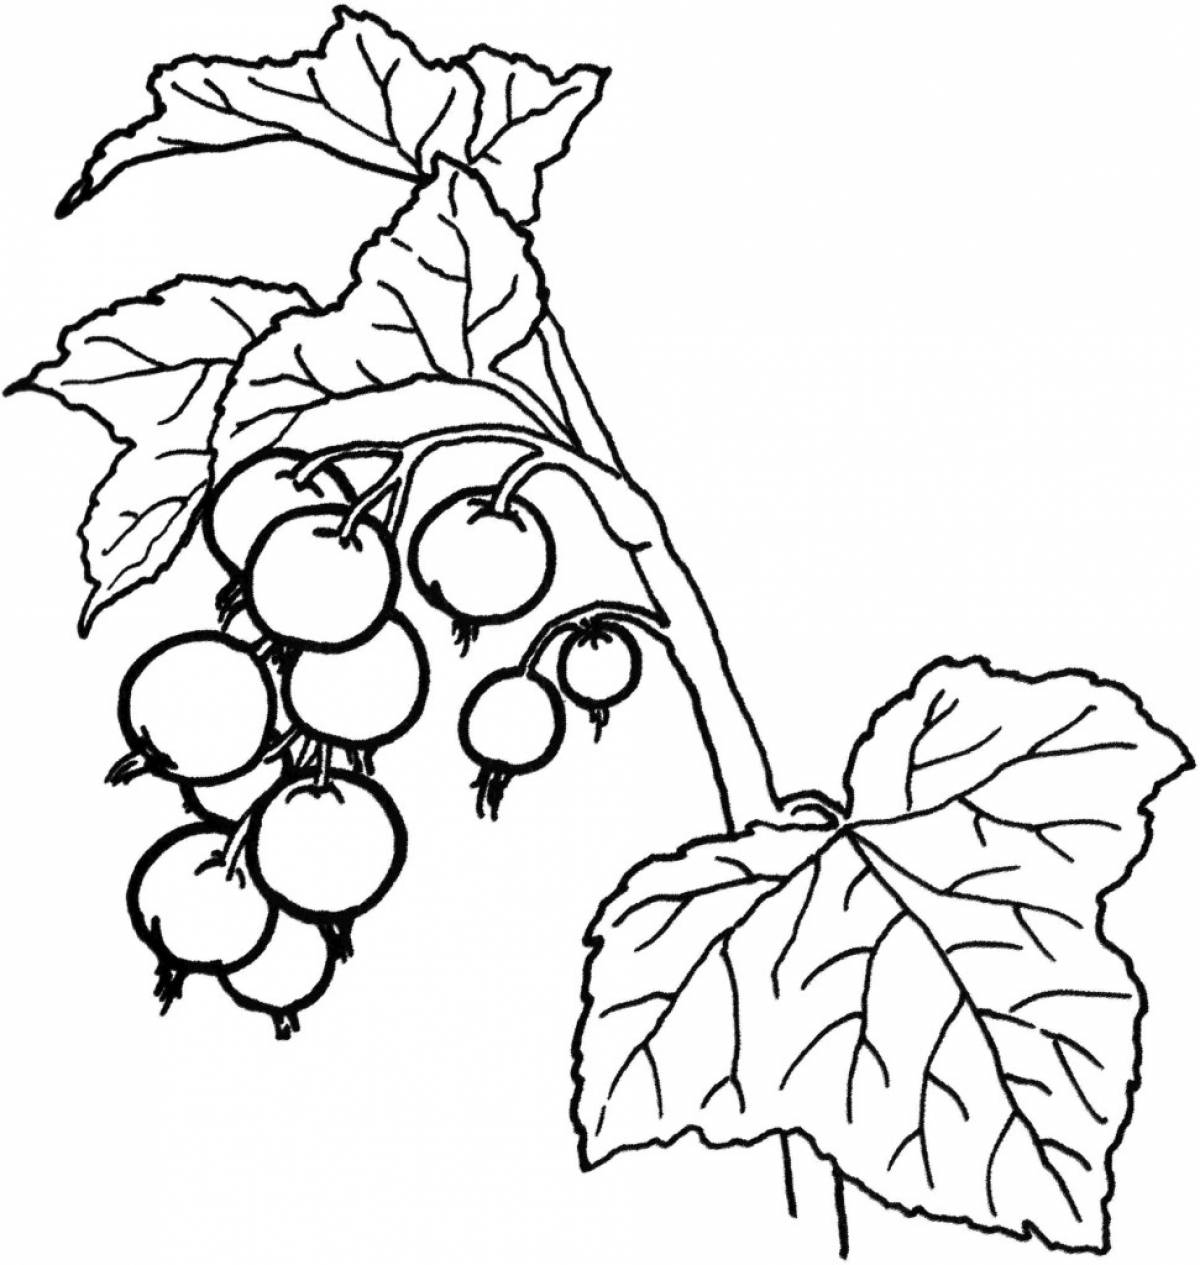 Currant coloring page